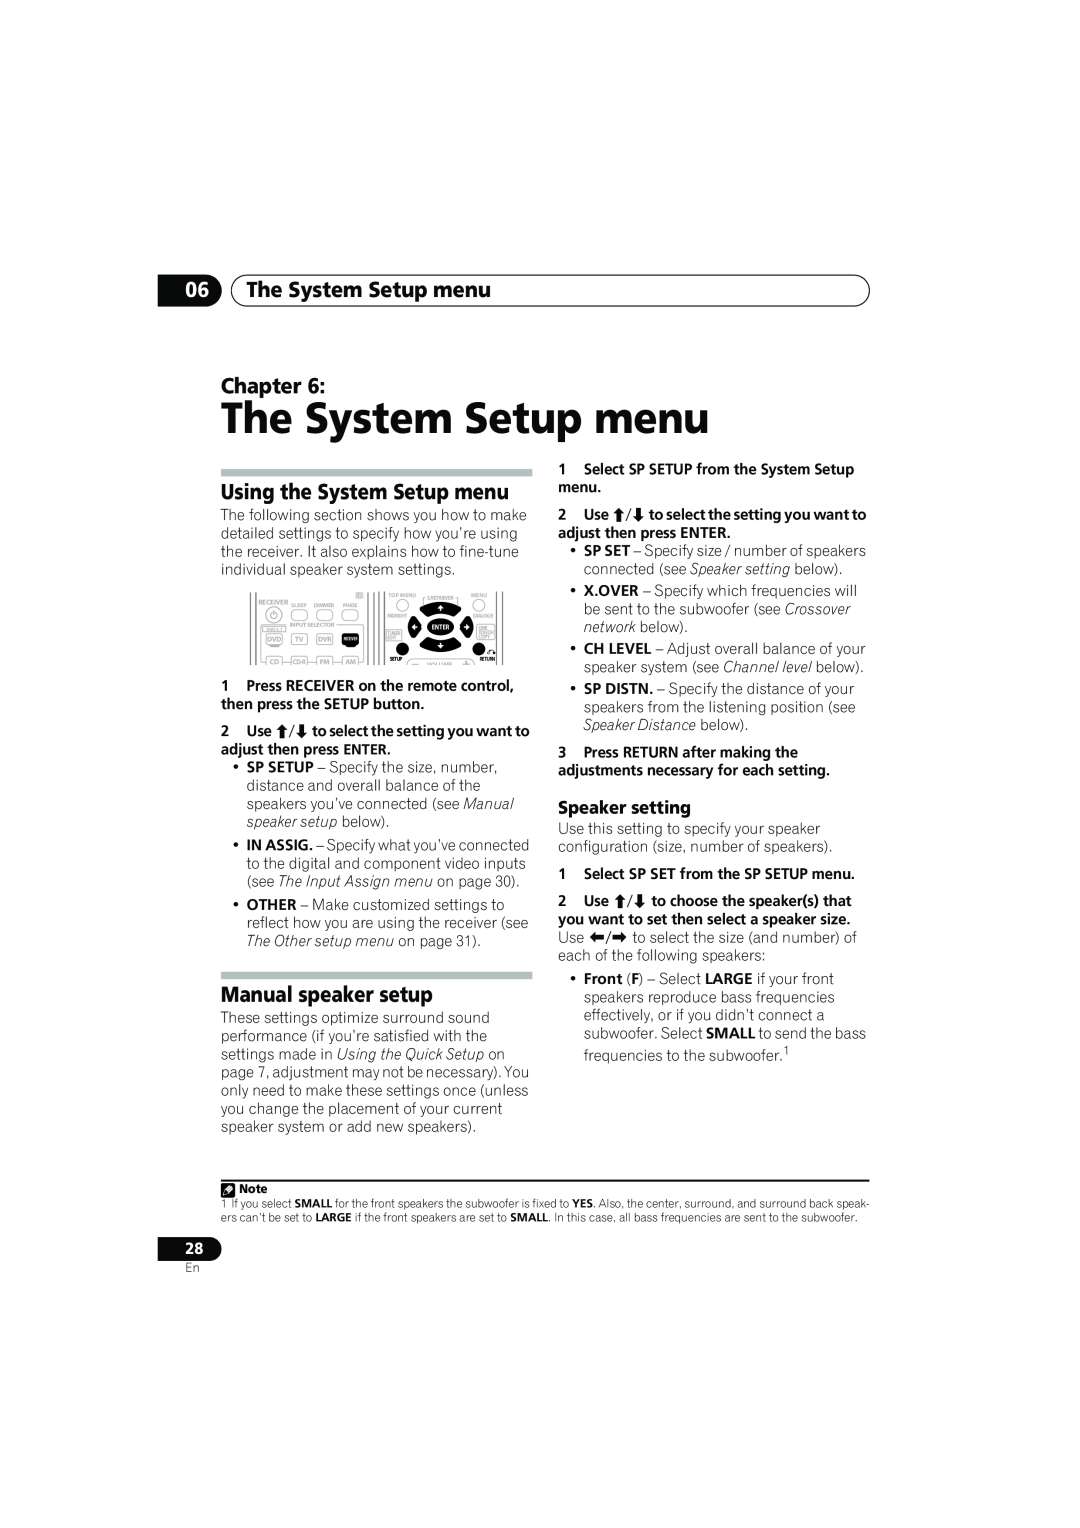 Pioneer XRE3138-A 06The System Setup menu Chapter, Using the System Setup menu, Manual speaker setup, Speaker setting 